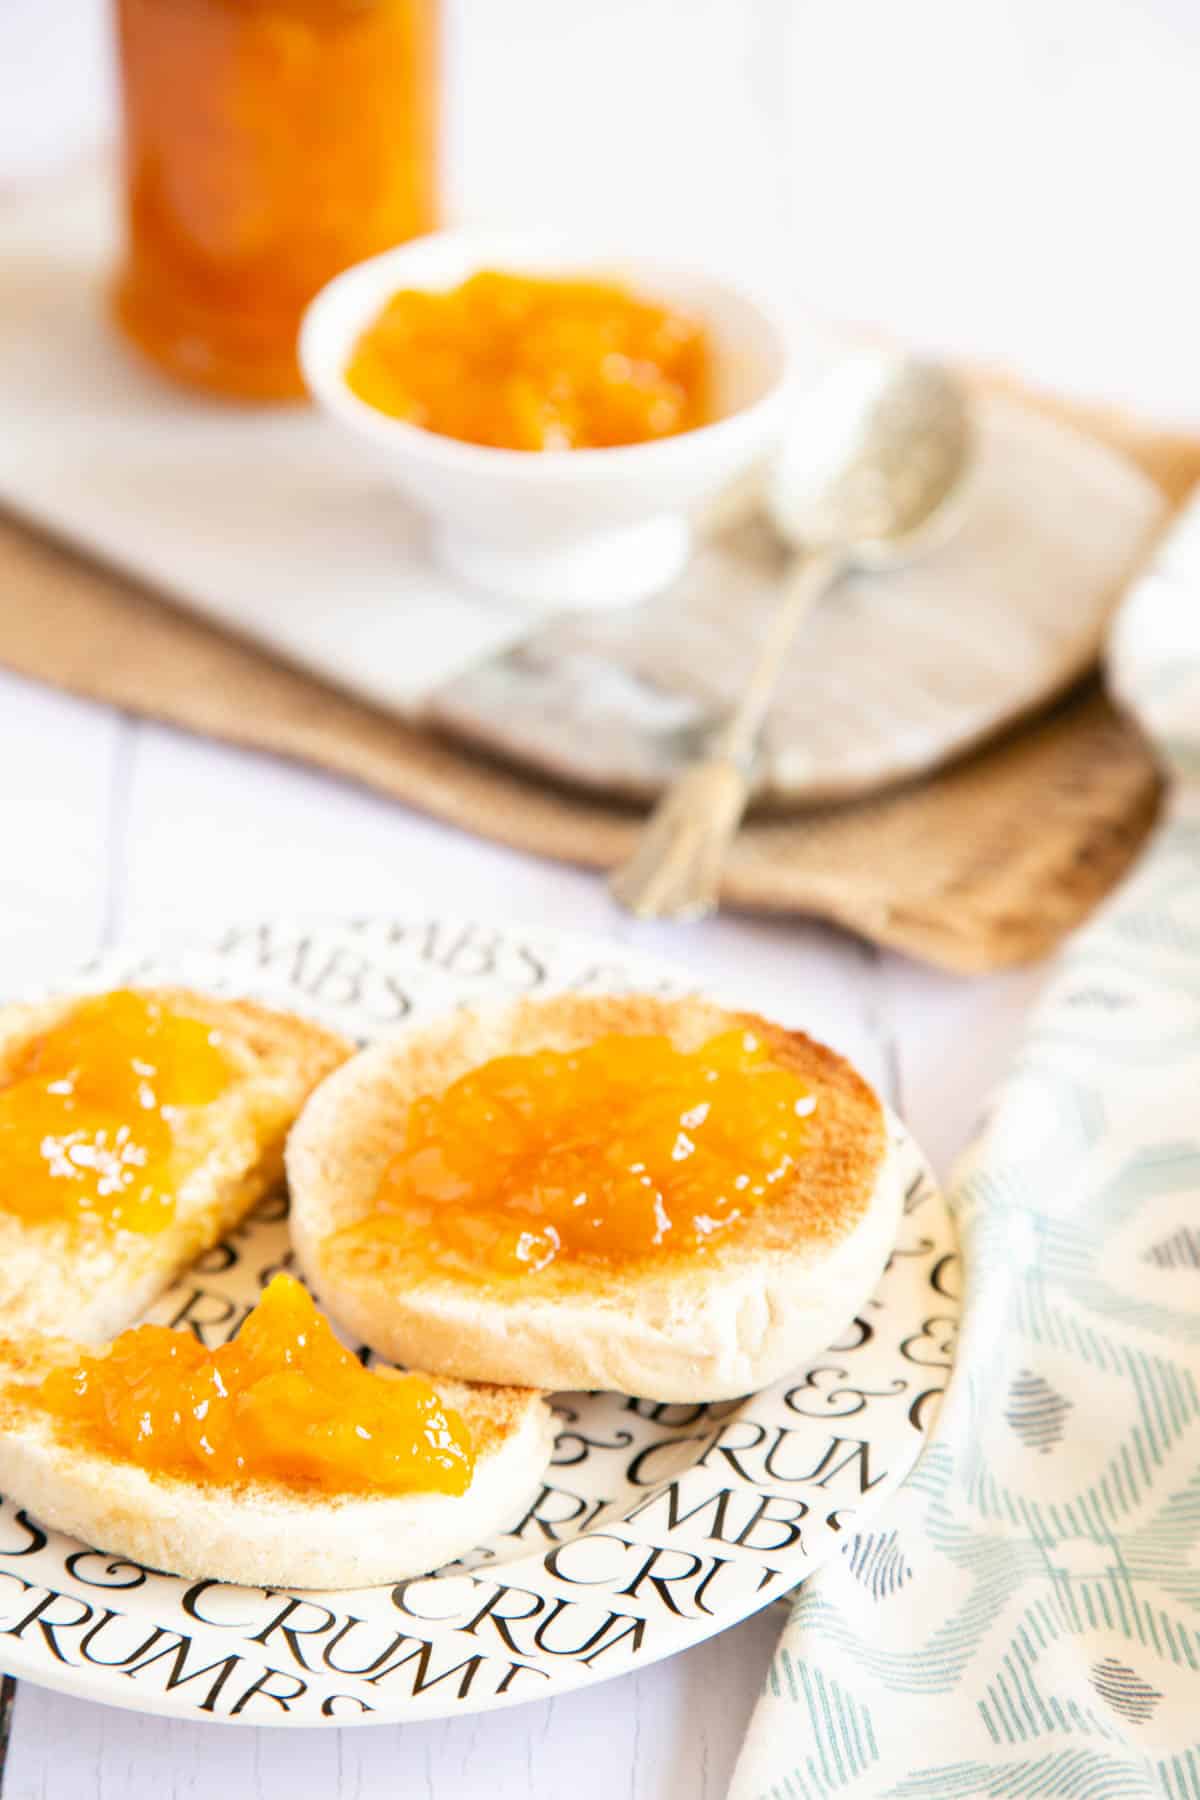 Delicious muffins spread with golden mango jam, a serving board in the background with a jar and a dish of jam.